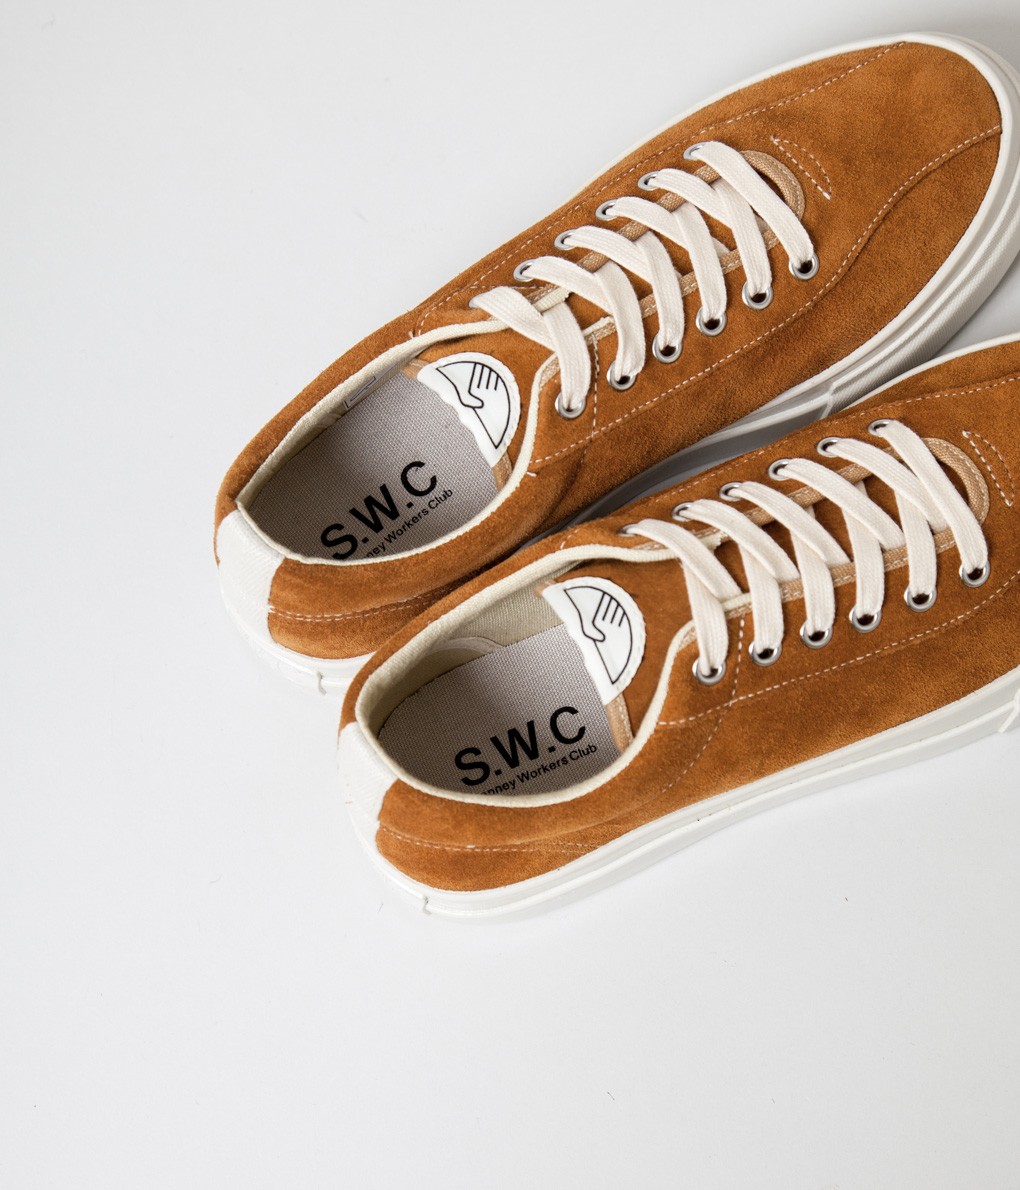 New Arrival “S.W.C (Stepney Workers Club) /DELLOW SUEDE SNEAKERS” |  well-made by MAIDENS SHOP